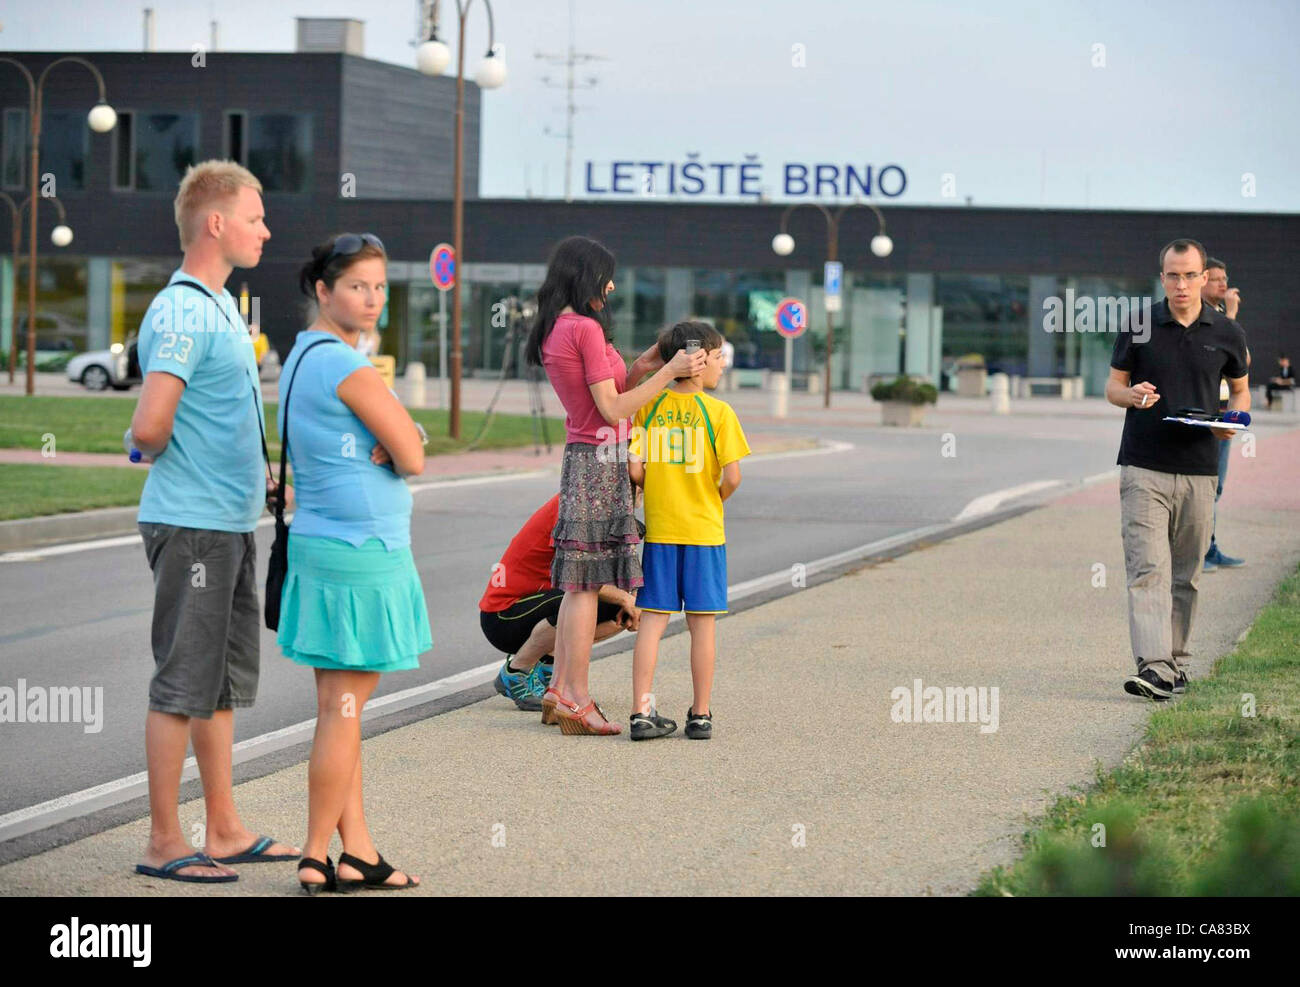 People wait for the the Airplane of the Czech Air Force with the Czech tourists who crashed with the bus in Croatia, landed in Brno, Czech Republic shortly before 8 PM on June 24, 2012. The bus with Czech tourists crashed near Gospic, Croatia, Saturday, June 23, 2012. Eight tourists were killed and 51 injured in a bus crash on a major highway in Croatia early Saturday, police said. The accident happened some 200 kilometers (124 miles) south of Zagreb, on the highway connecting the Croatian capital with the central Adriatic coastal city of Split. (CTK Photo/Vaclav Salek) Stock Photo